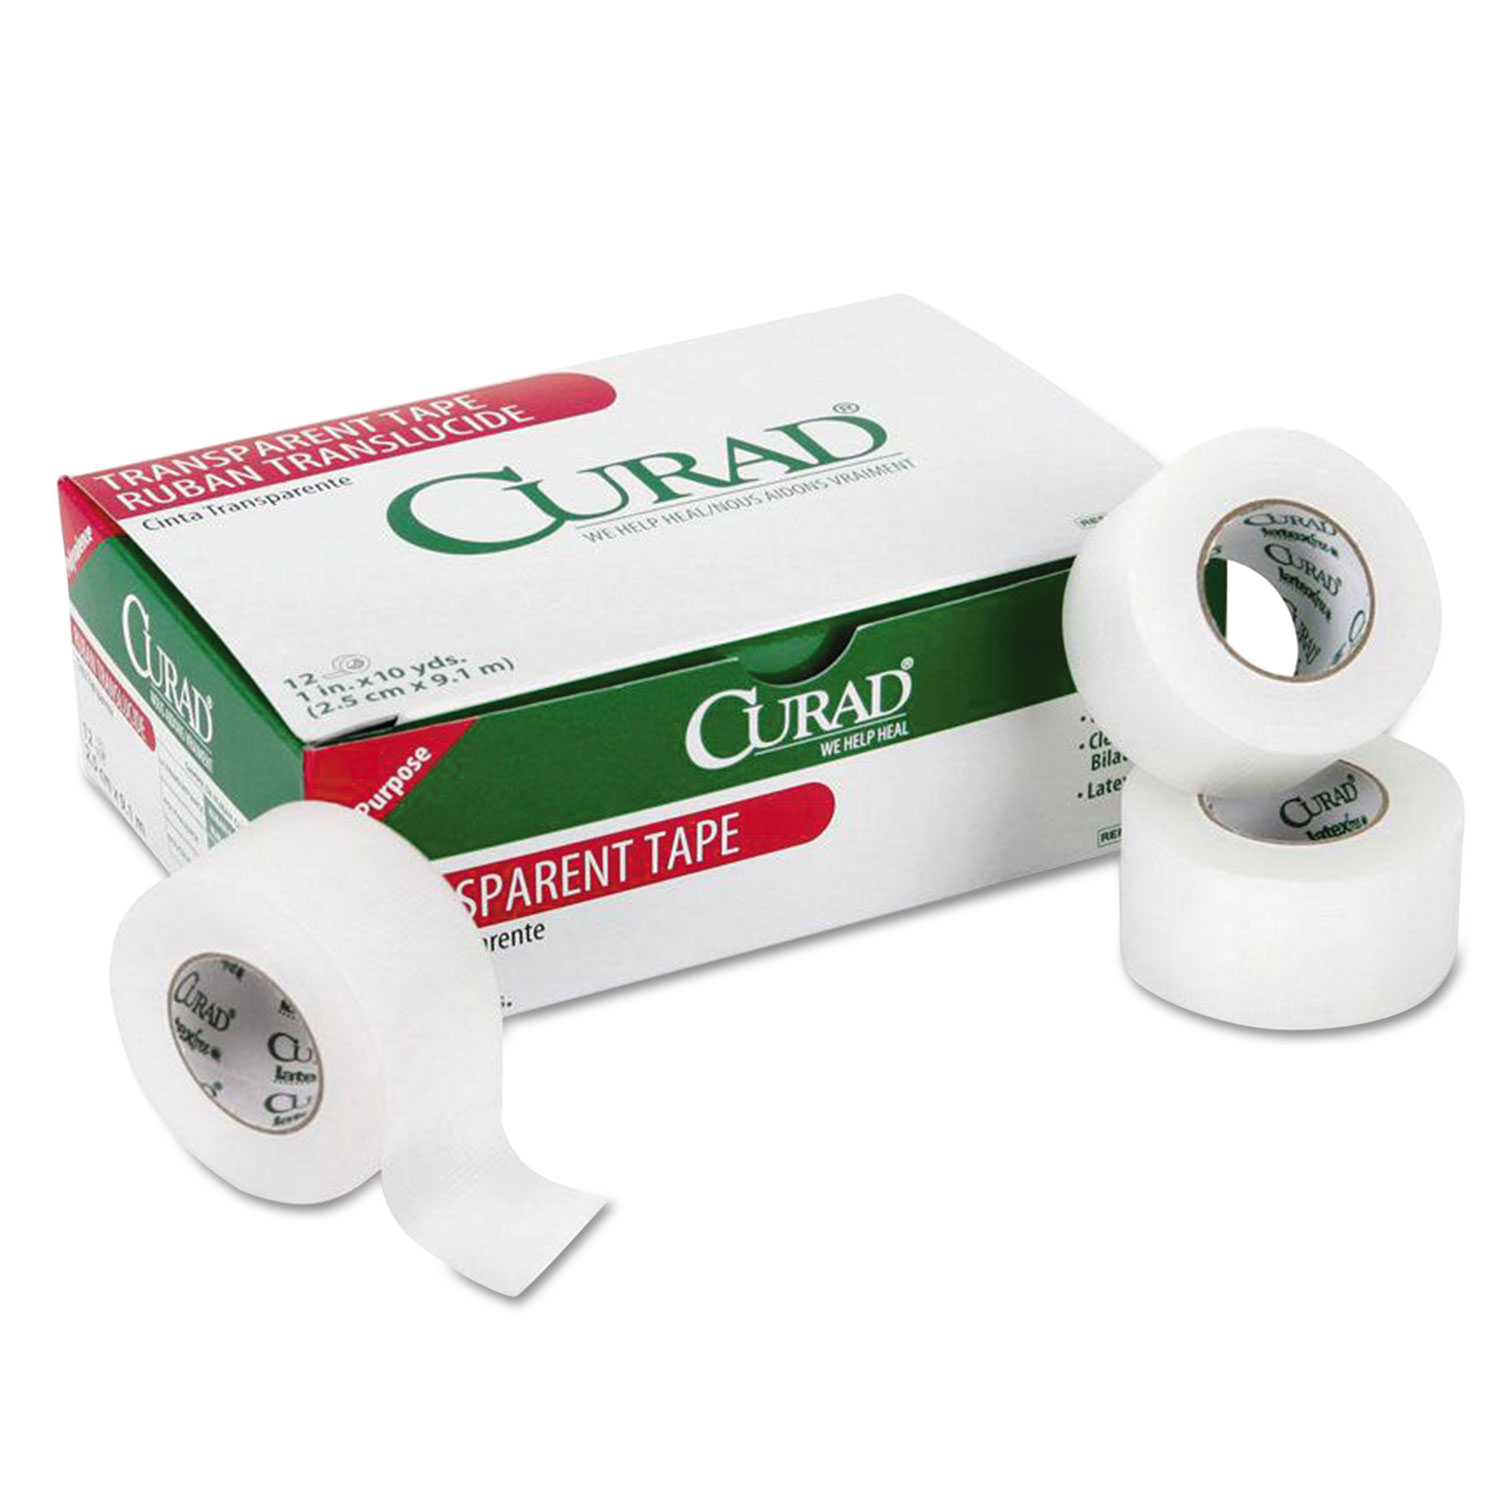  Curad NON270201 Transparent Surgical Tape, 1 Core, 1 x 10 yds, Clear, 12/Pack (MIINON270201) 